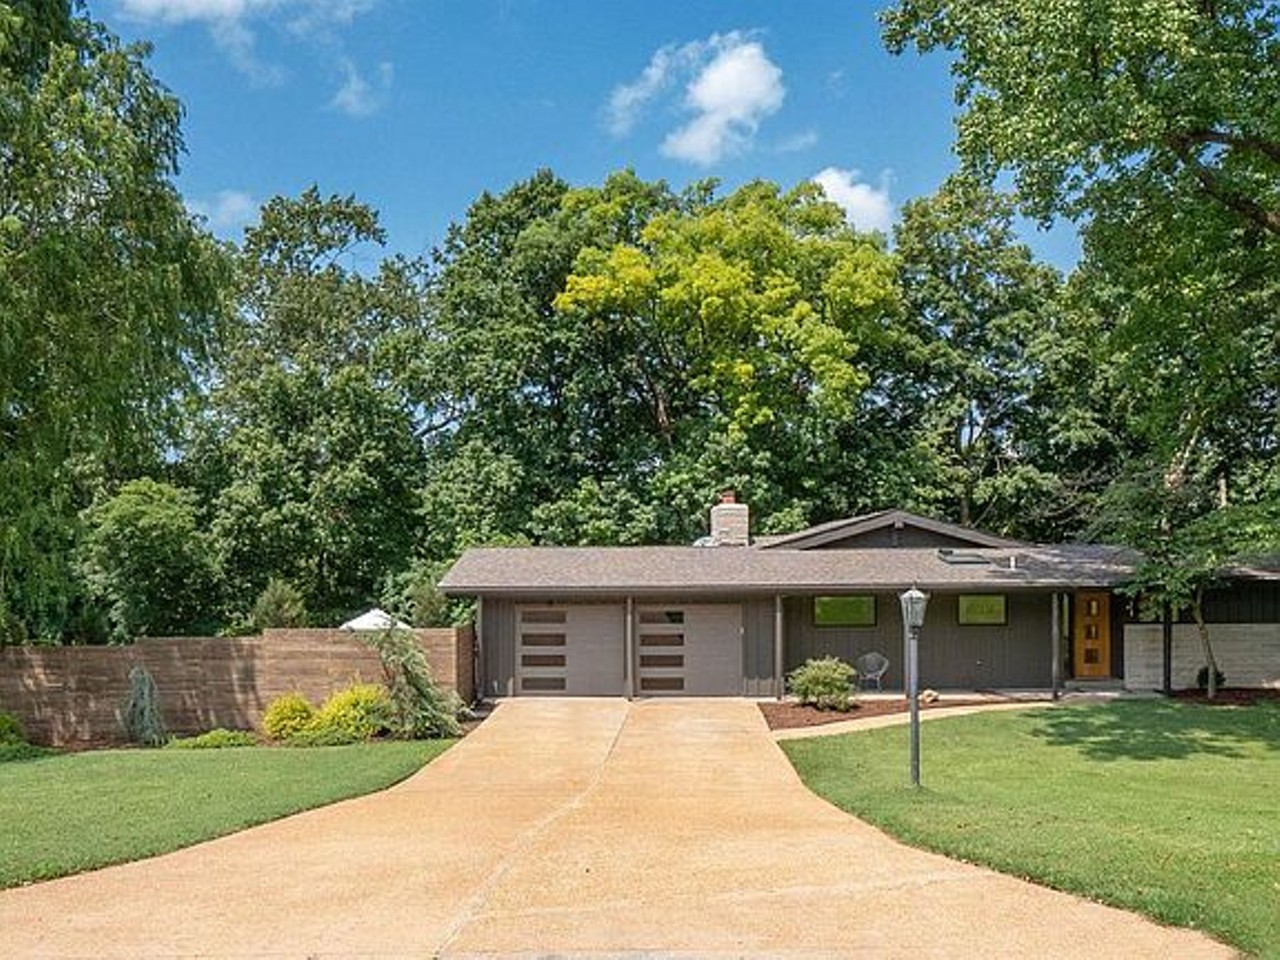 Don Draper's Dream House Is For Sale in Kirkwood [PHOTOS]